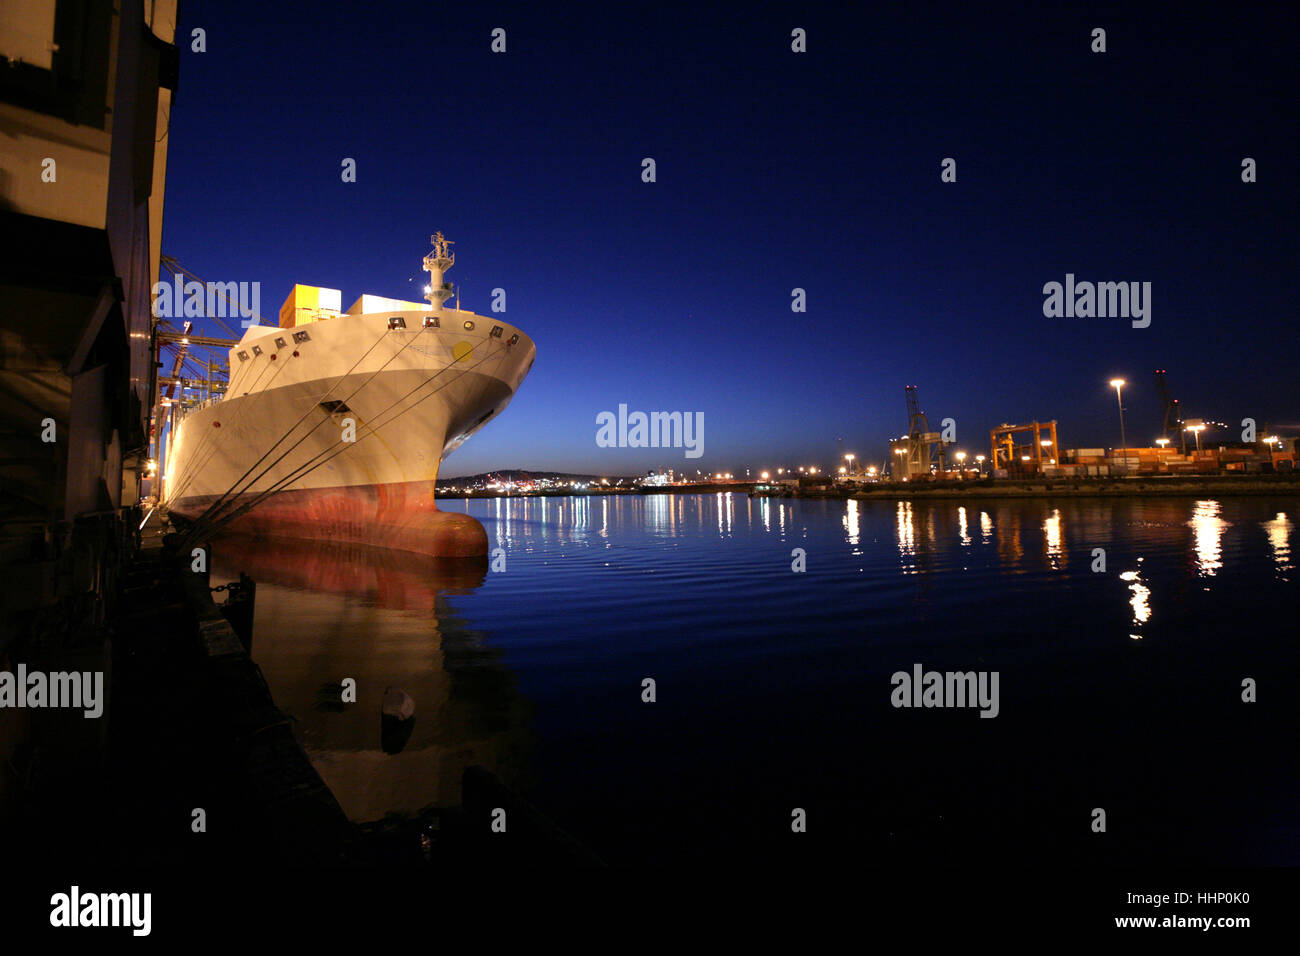 Freighter in port at night Stock Photo